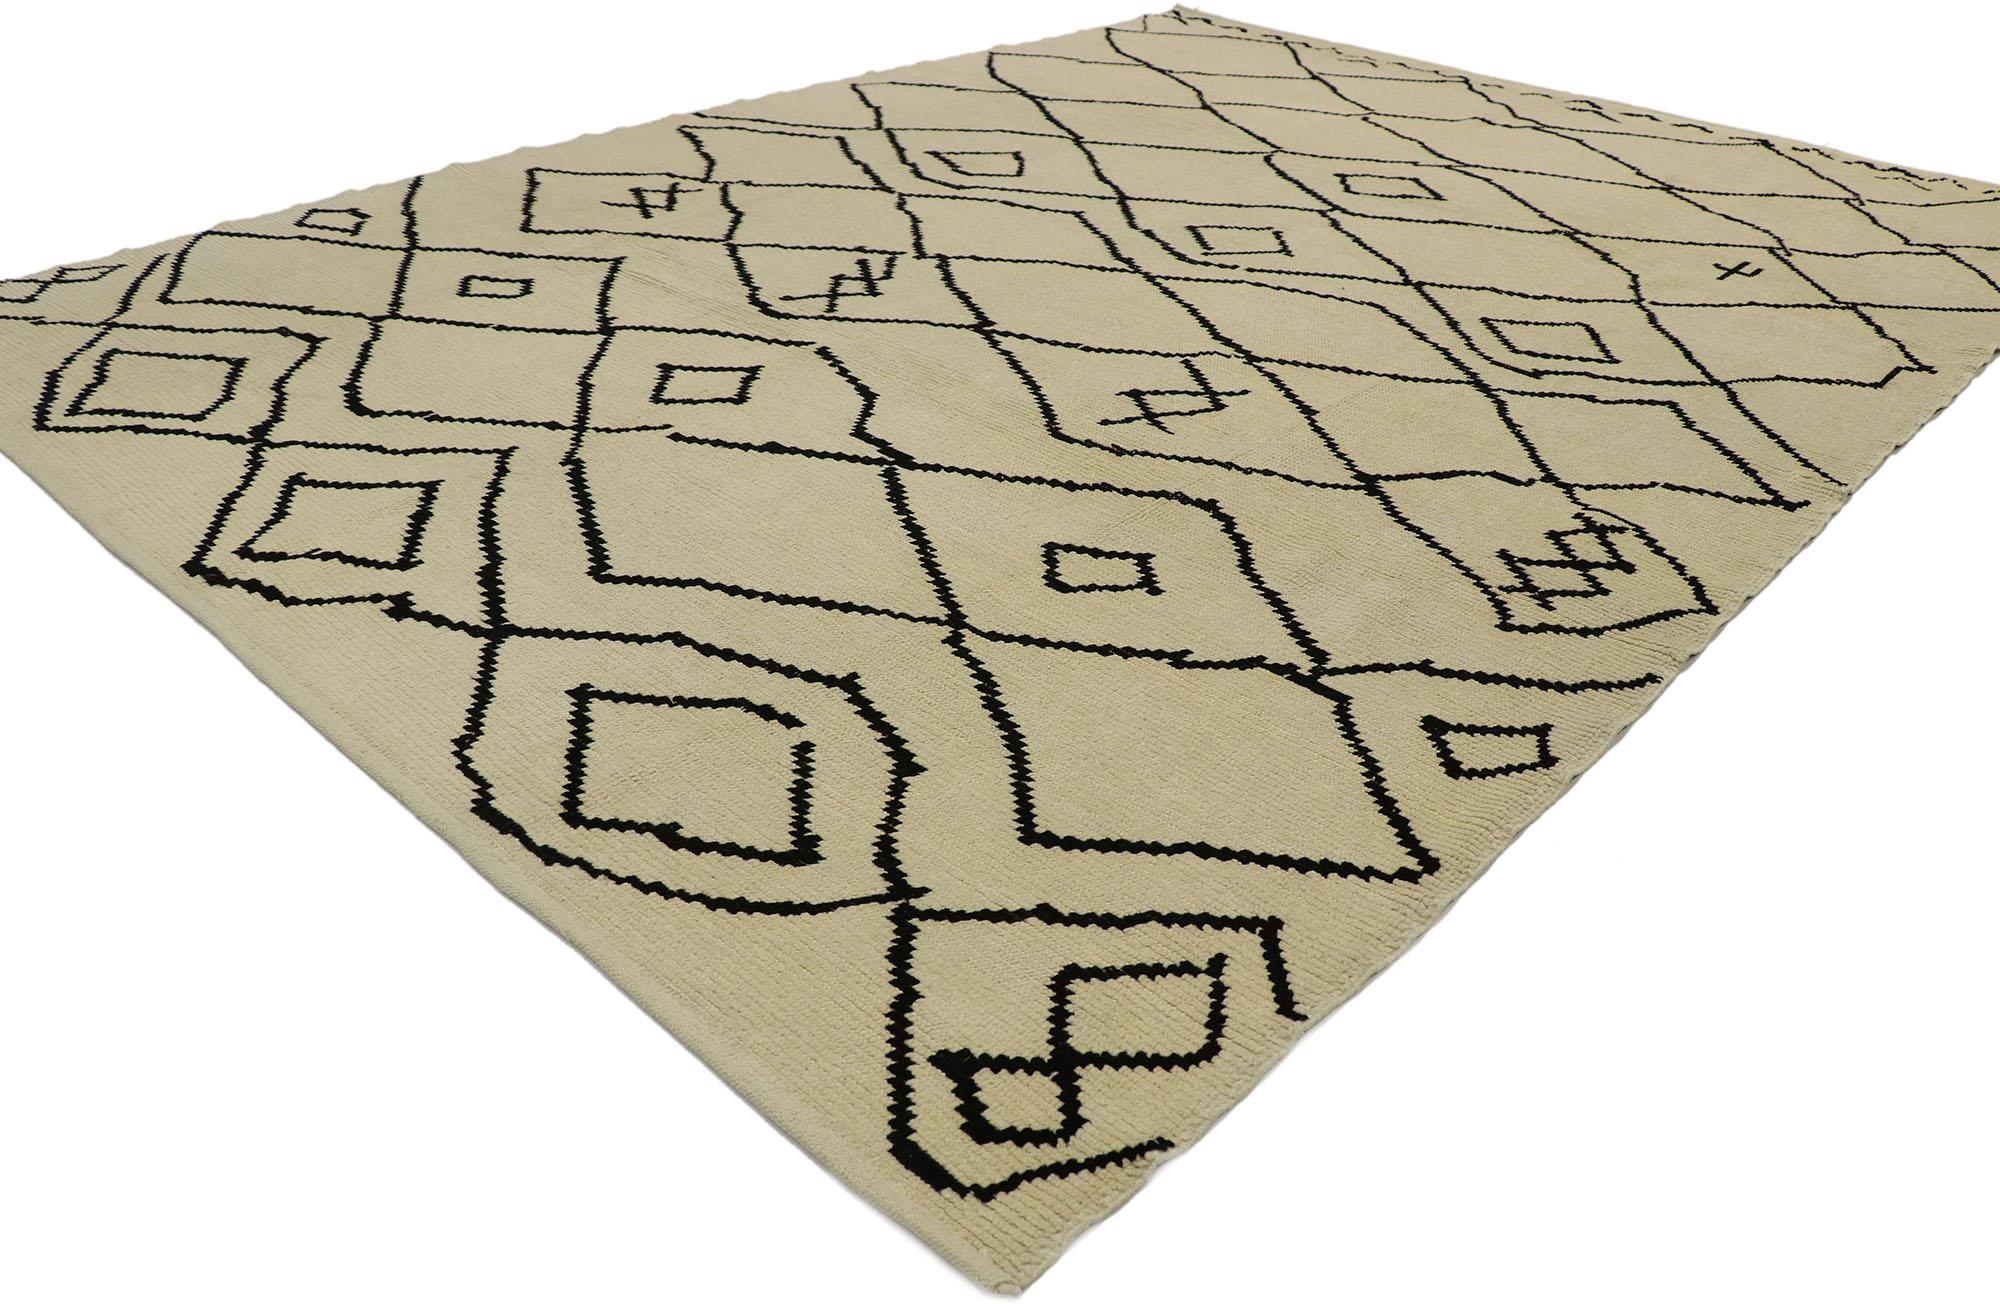 53192, new contemporary Moroccan style rug with tribal design and hygge vibes. Warm and inviting with cozy hygge vibes, this hand knotted wool contemporary Moroccan style rug features contrasting black lines running the length of the sandy-beige